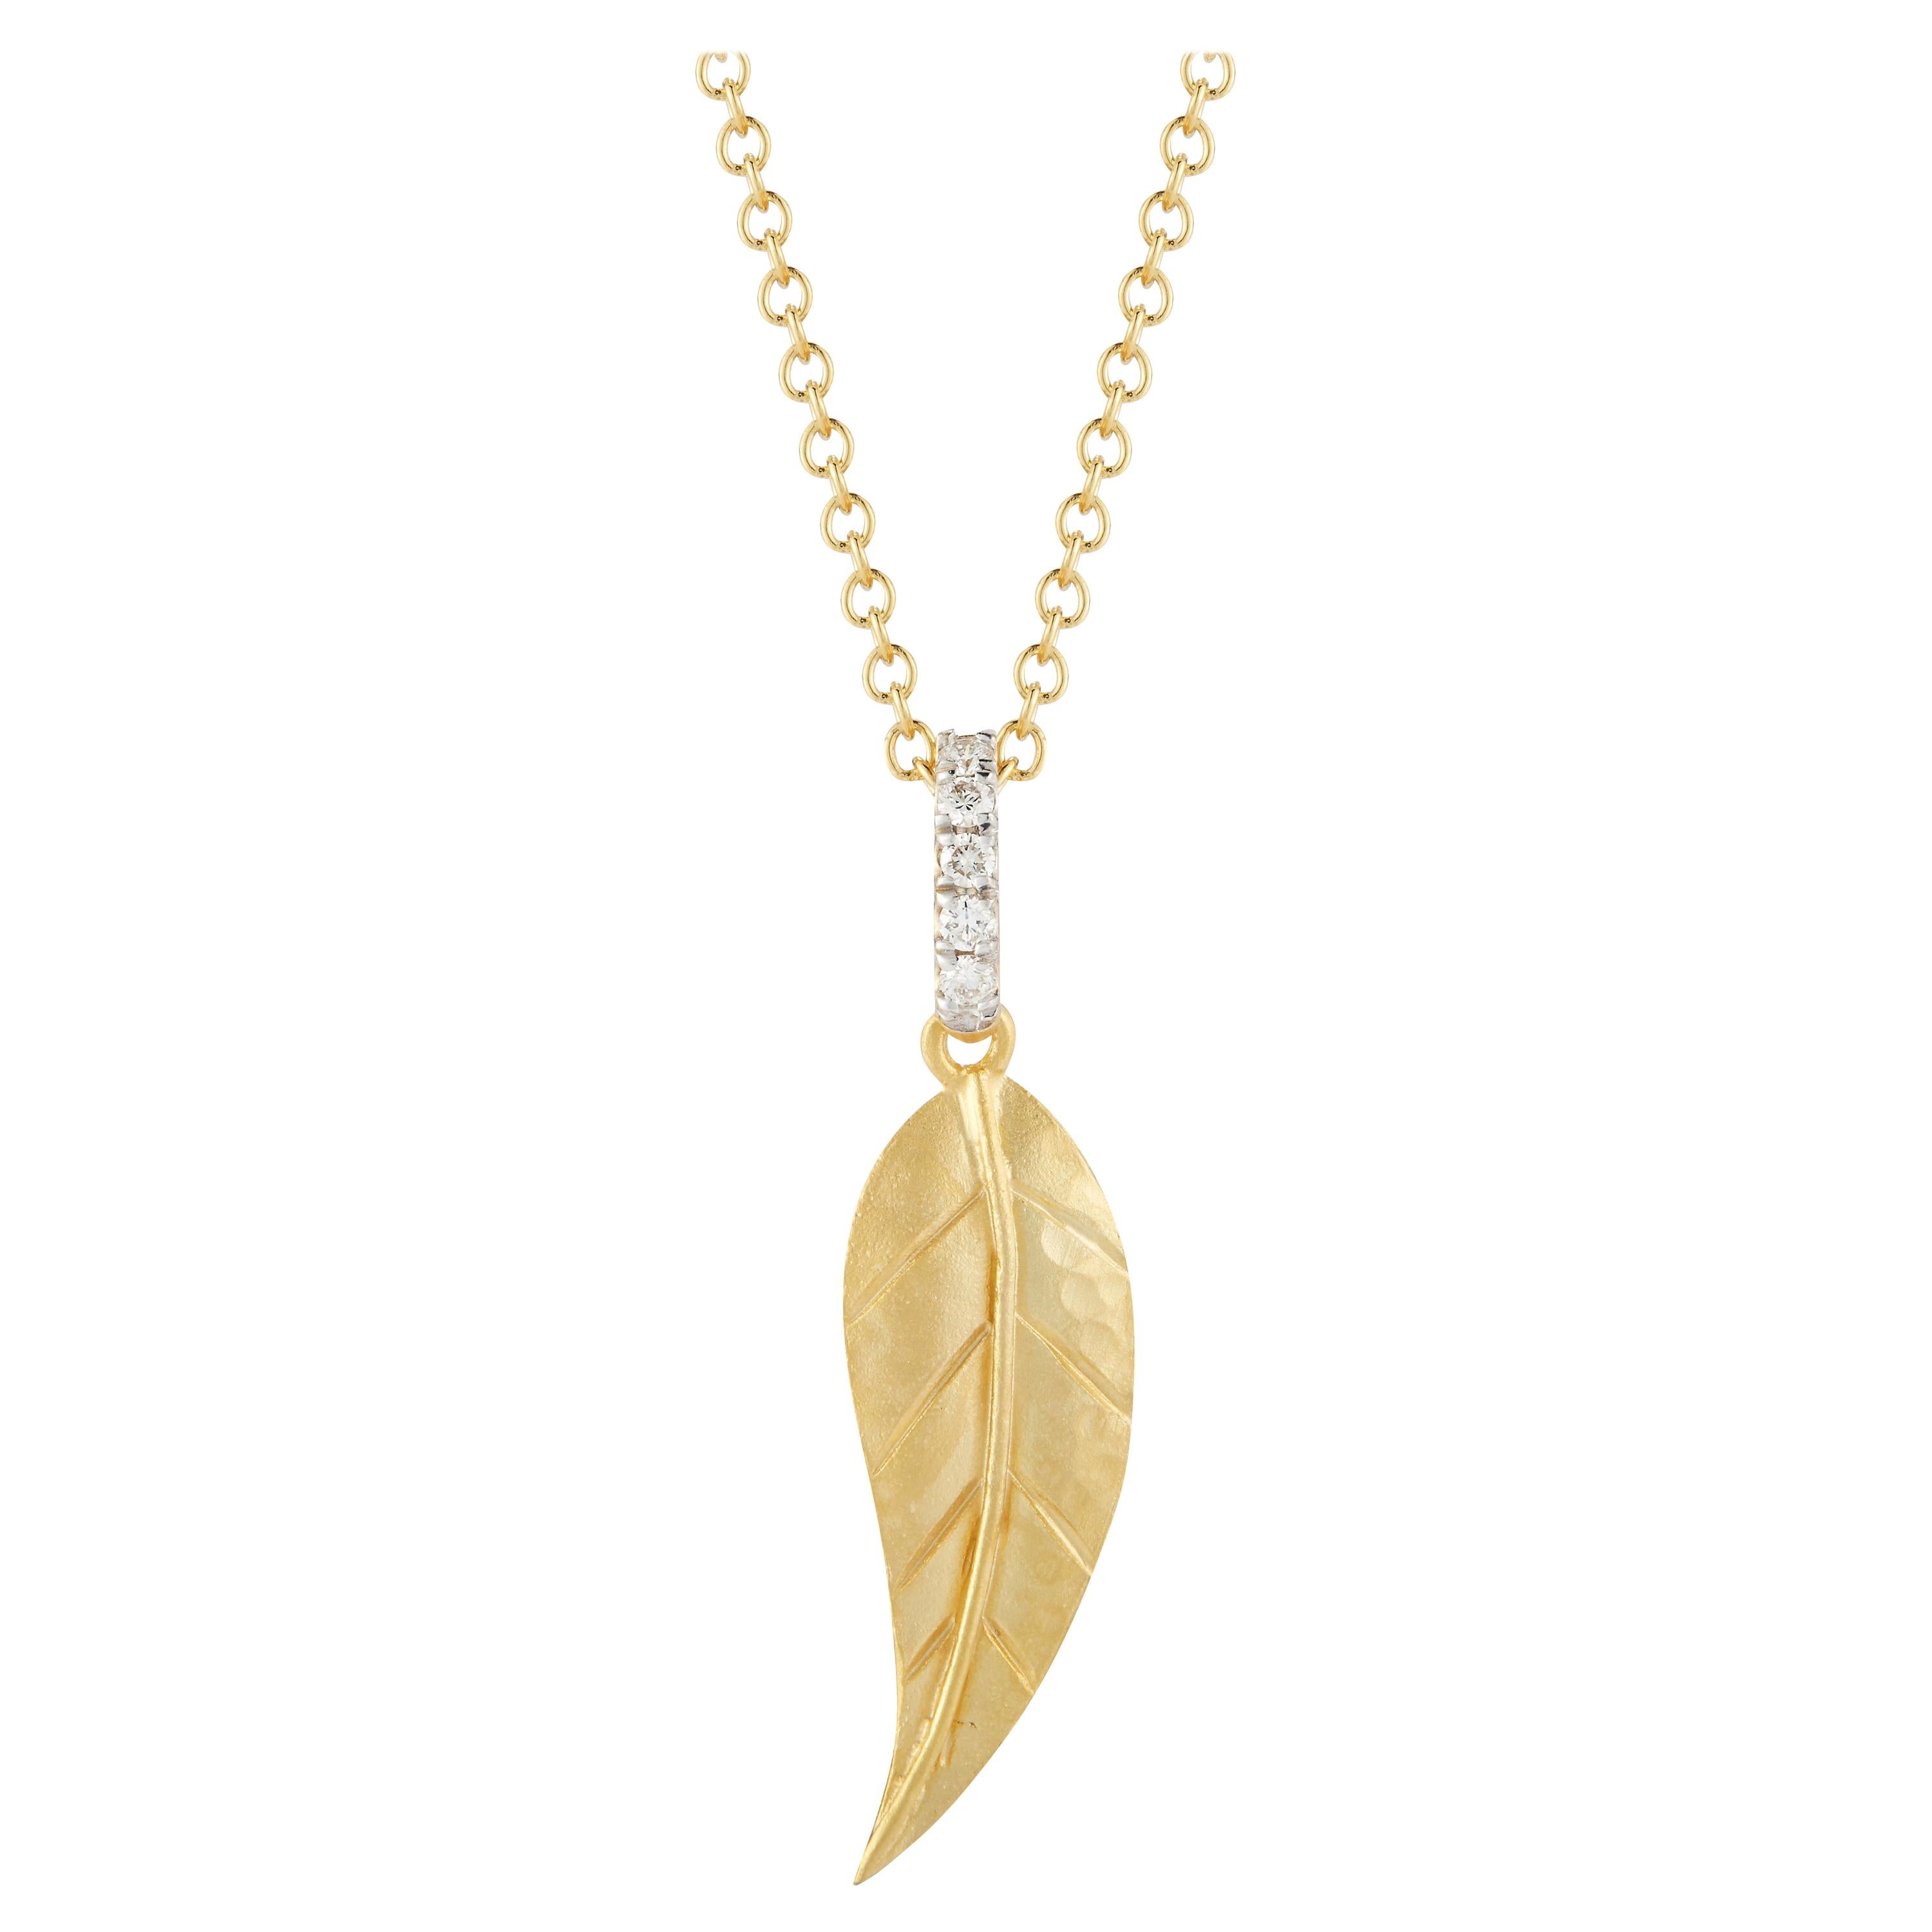 Hand-Crafted 14 Karat Yellow Gold Dainty Leaf Sliding Pendant For Sale